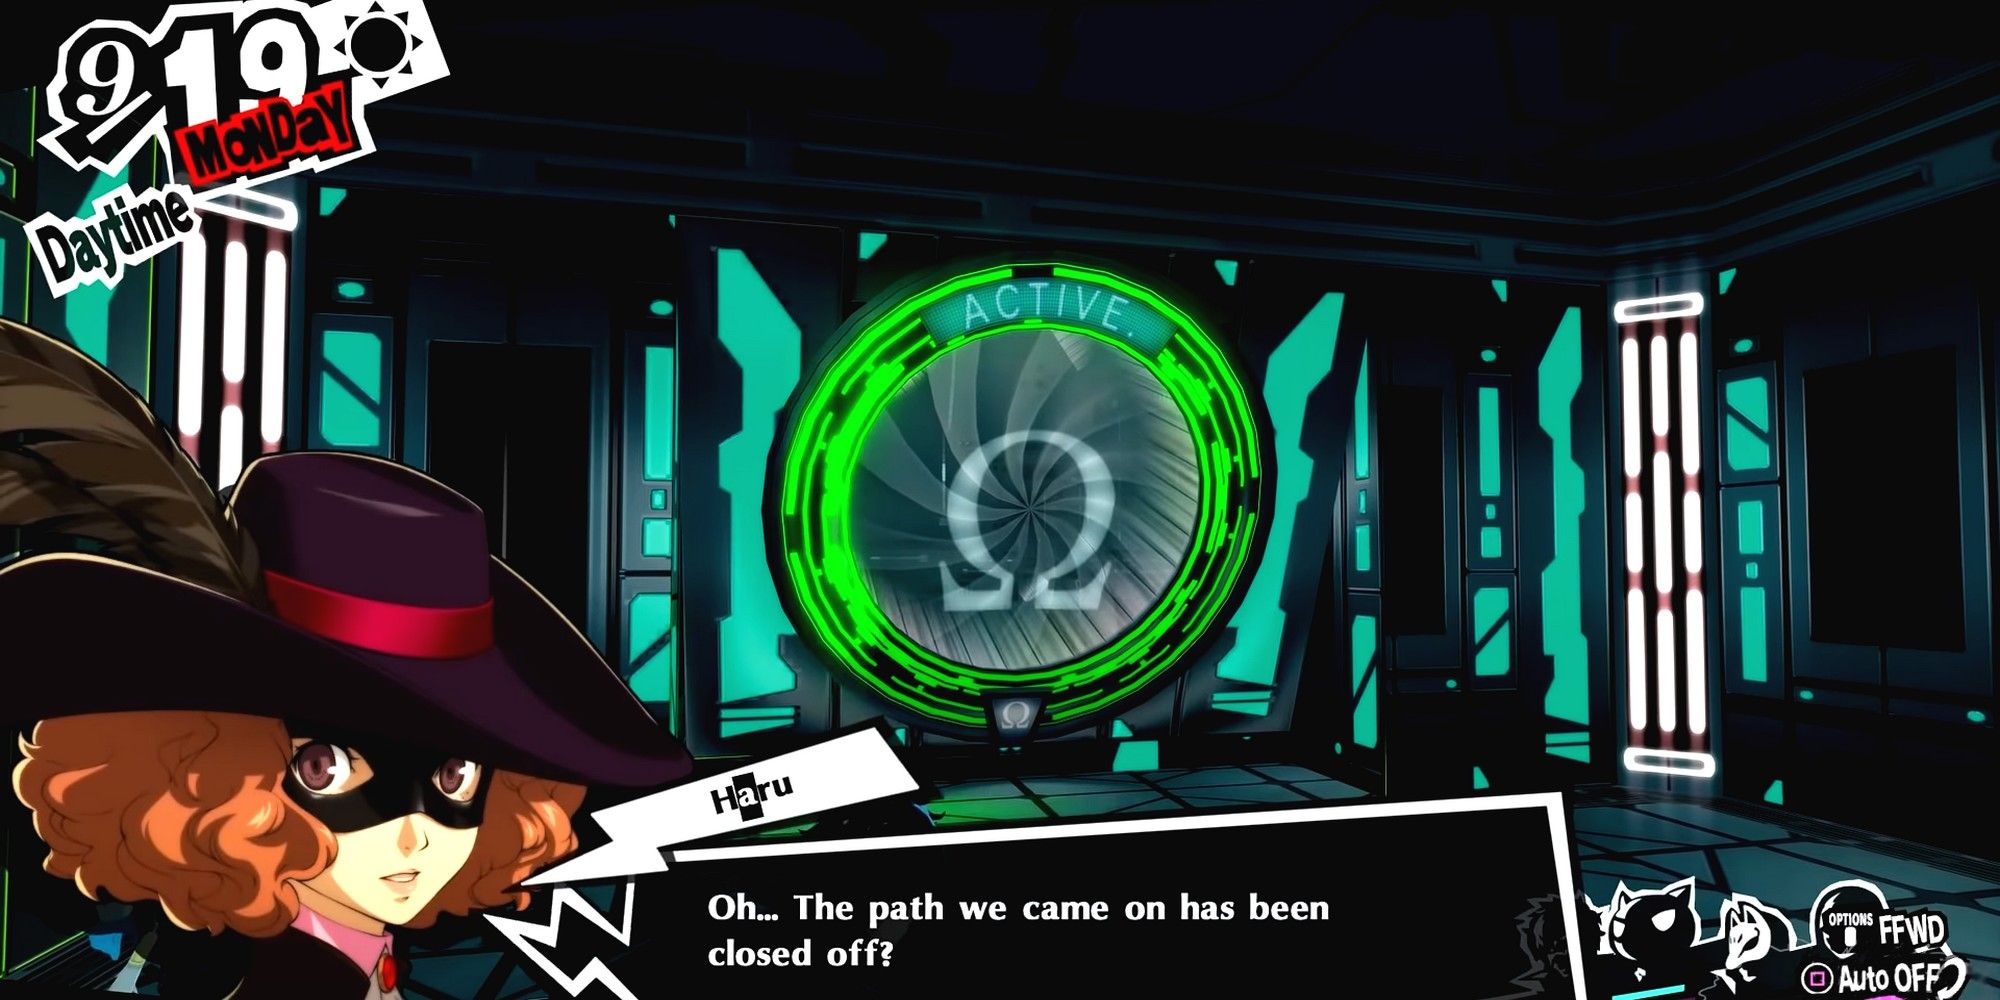 haru explaining the gimmick of the second airlock puzzle